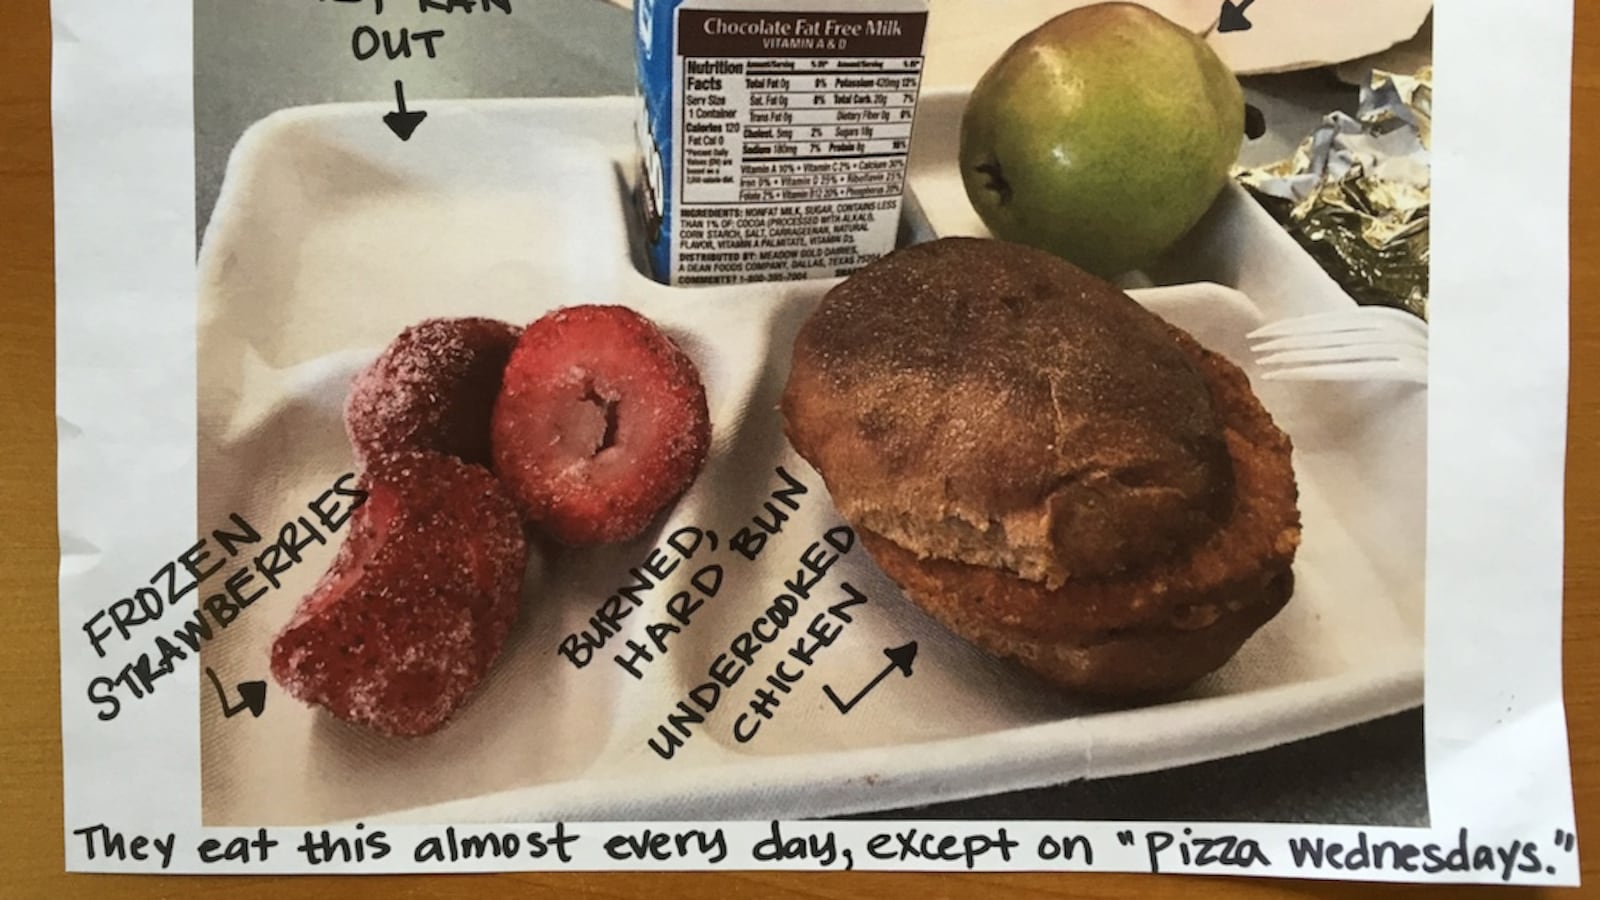 This lunch was served at Kepner Middle School on May 12. Descriptions were added by the Padres employee who received the lunch. (The chicken patties are pre-cooked by the vendor, but DPS officials said sometimes there are red spots in the meat that lead people to believe the meat is undercooked.)